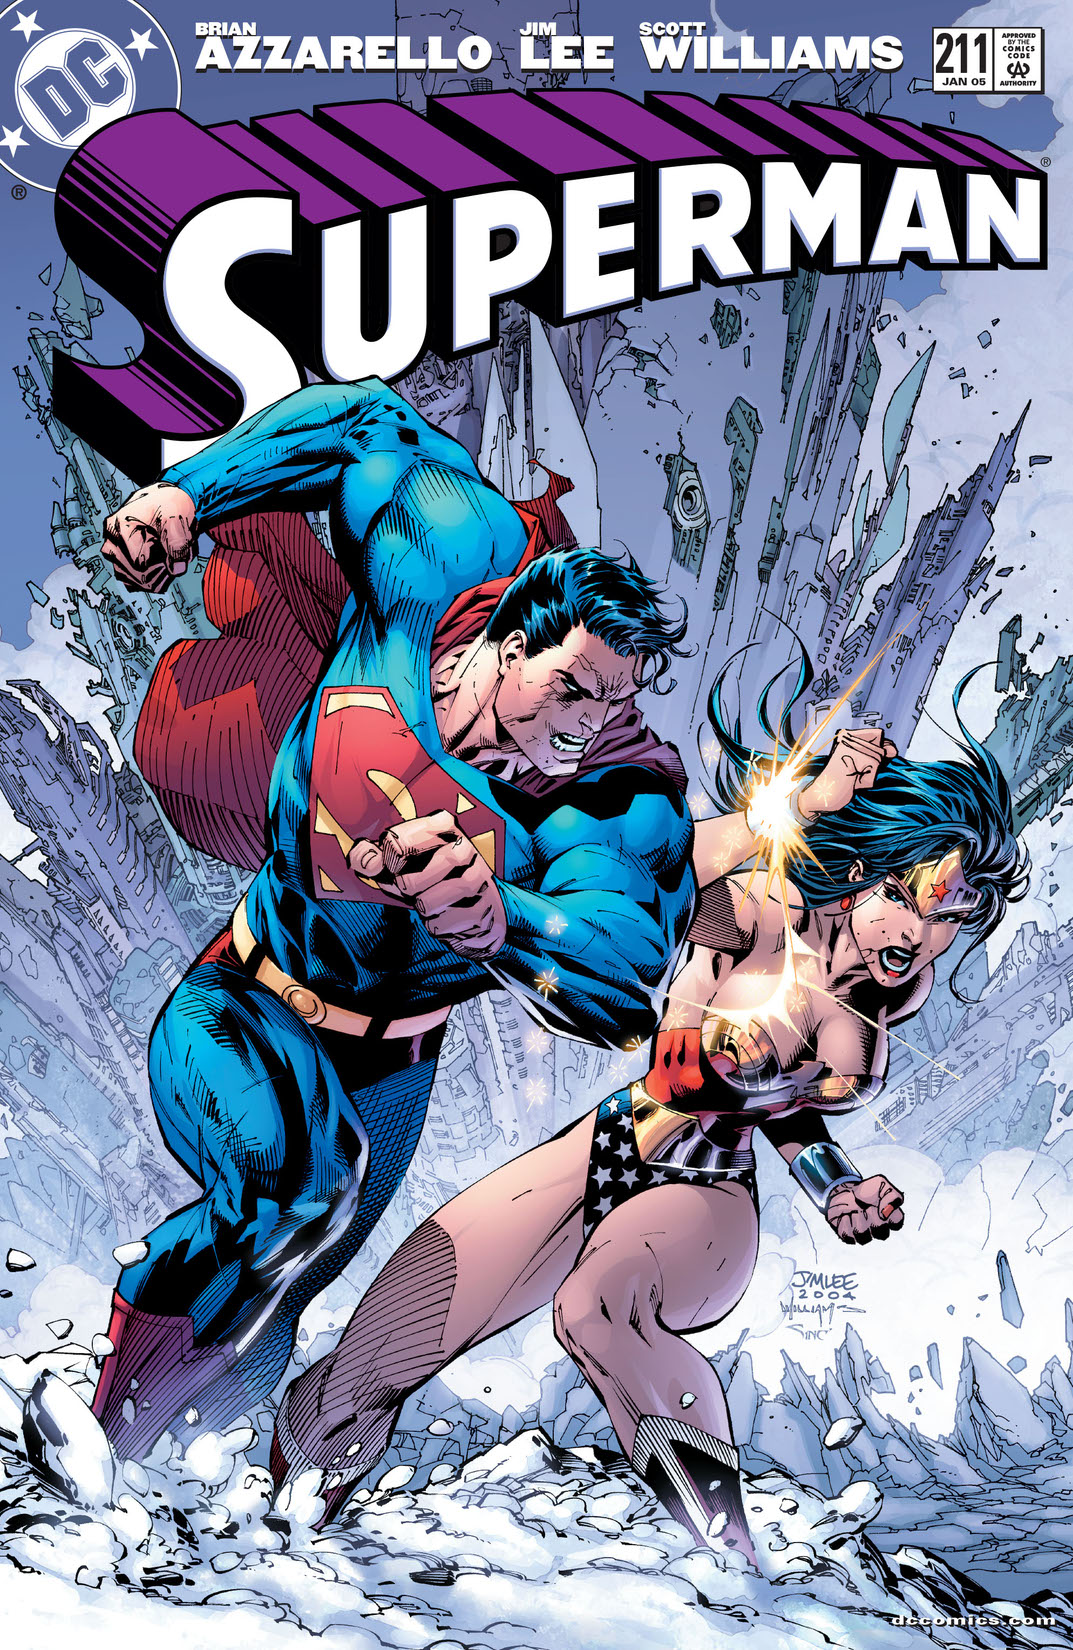 Superman (1986-) #211 preview images